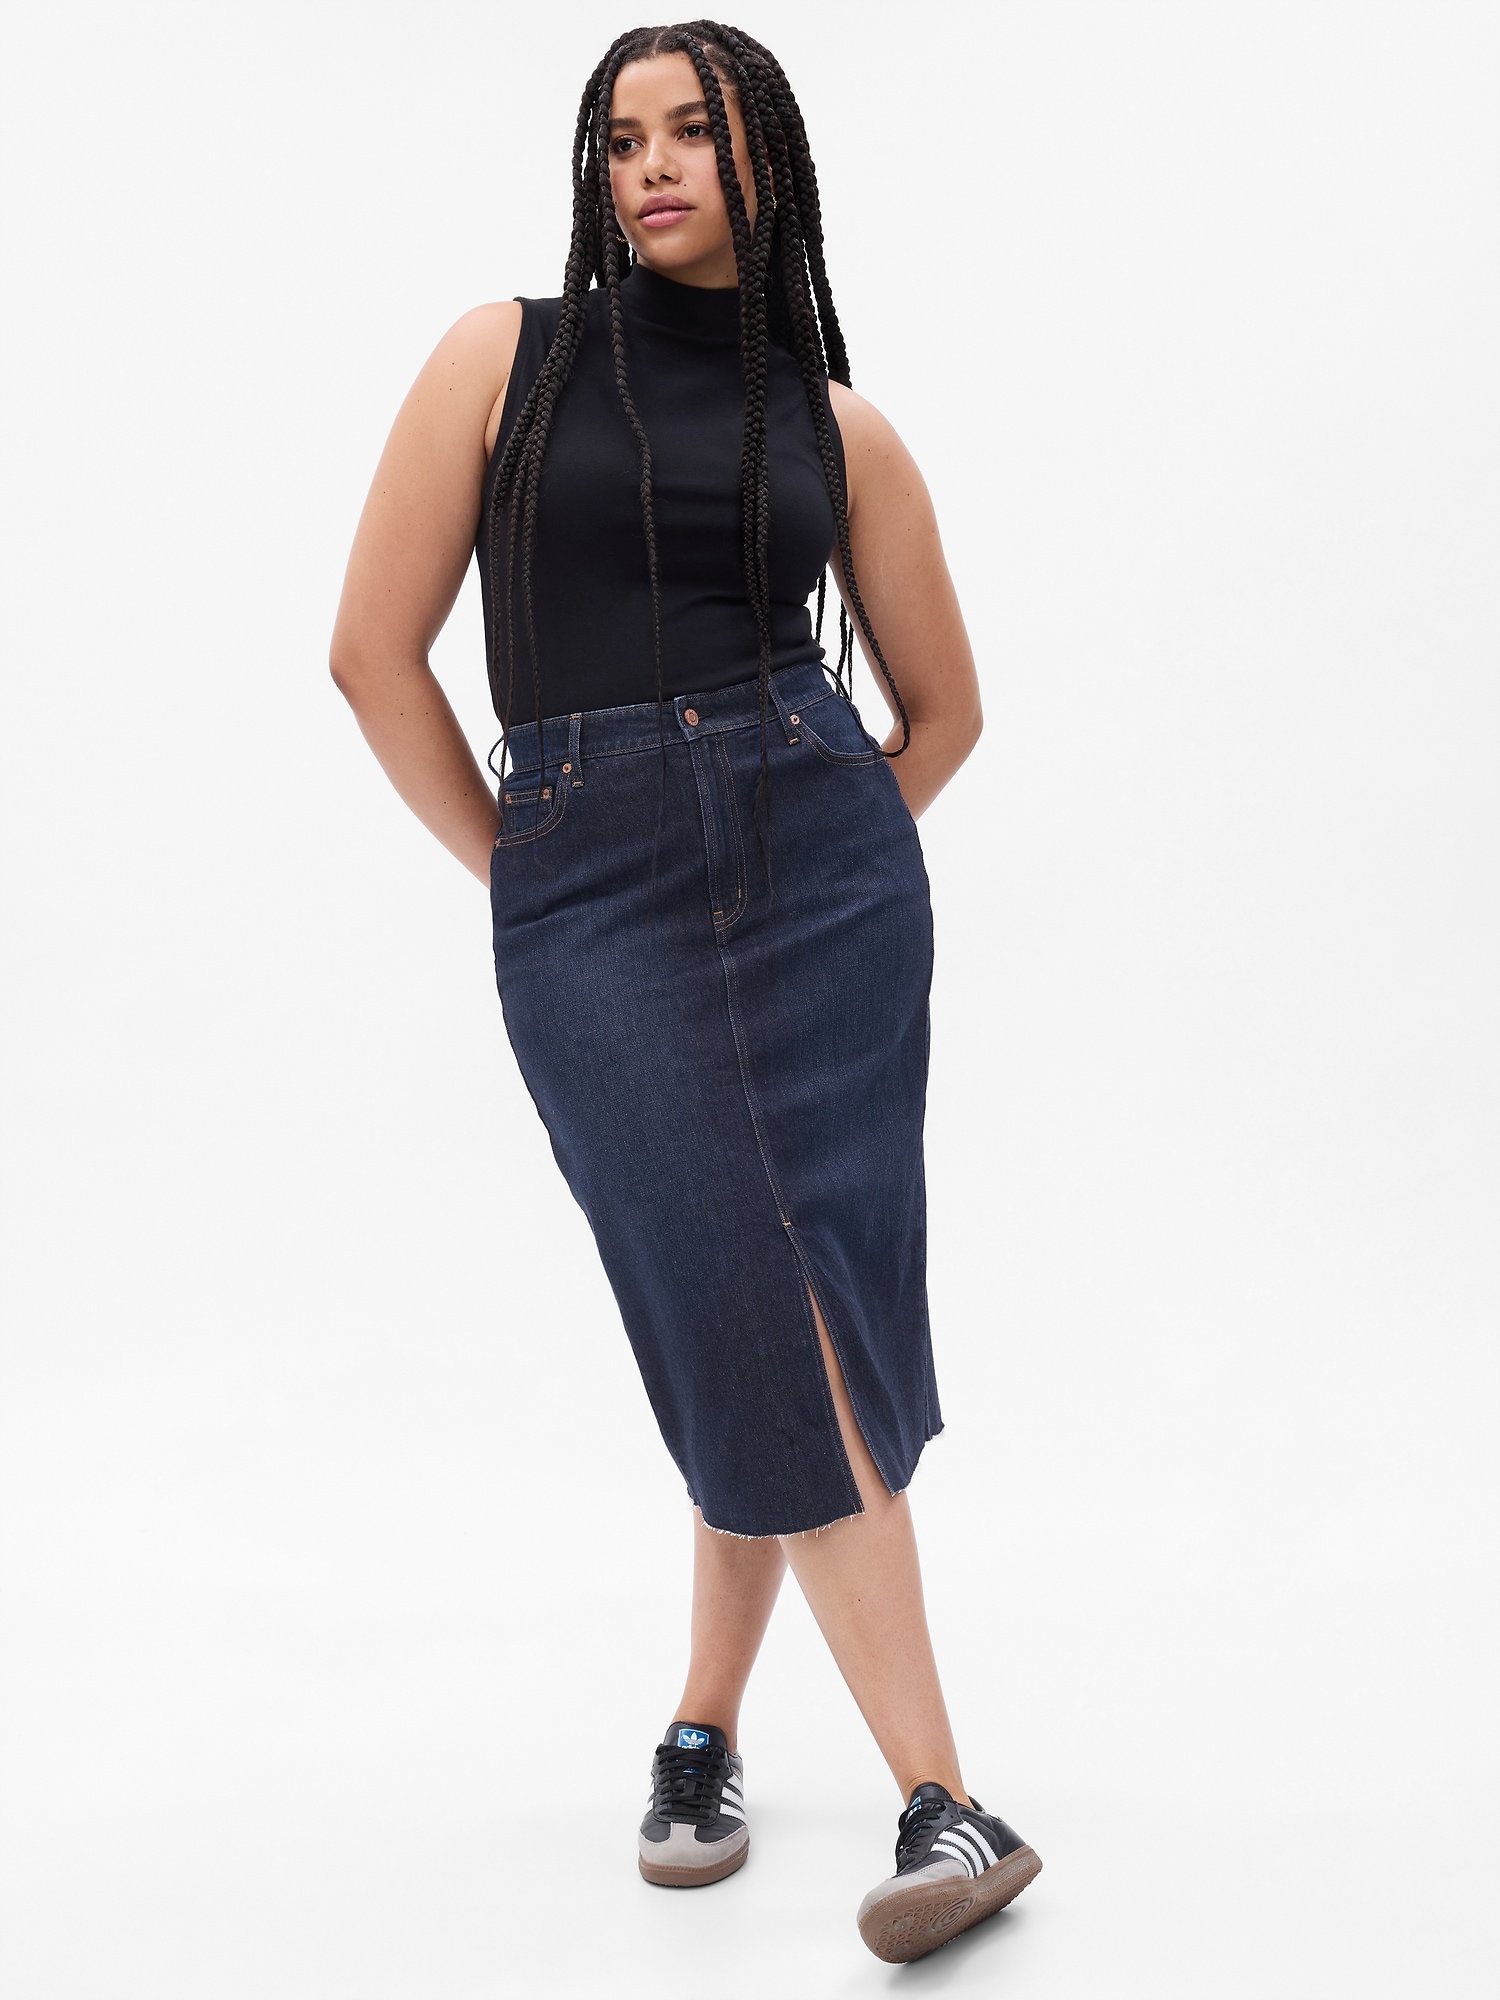 5 DENIM PLUS SIZE SKIRTS FOR SPRING AND SUMMER - Stylish Curves